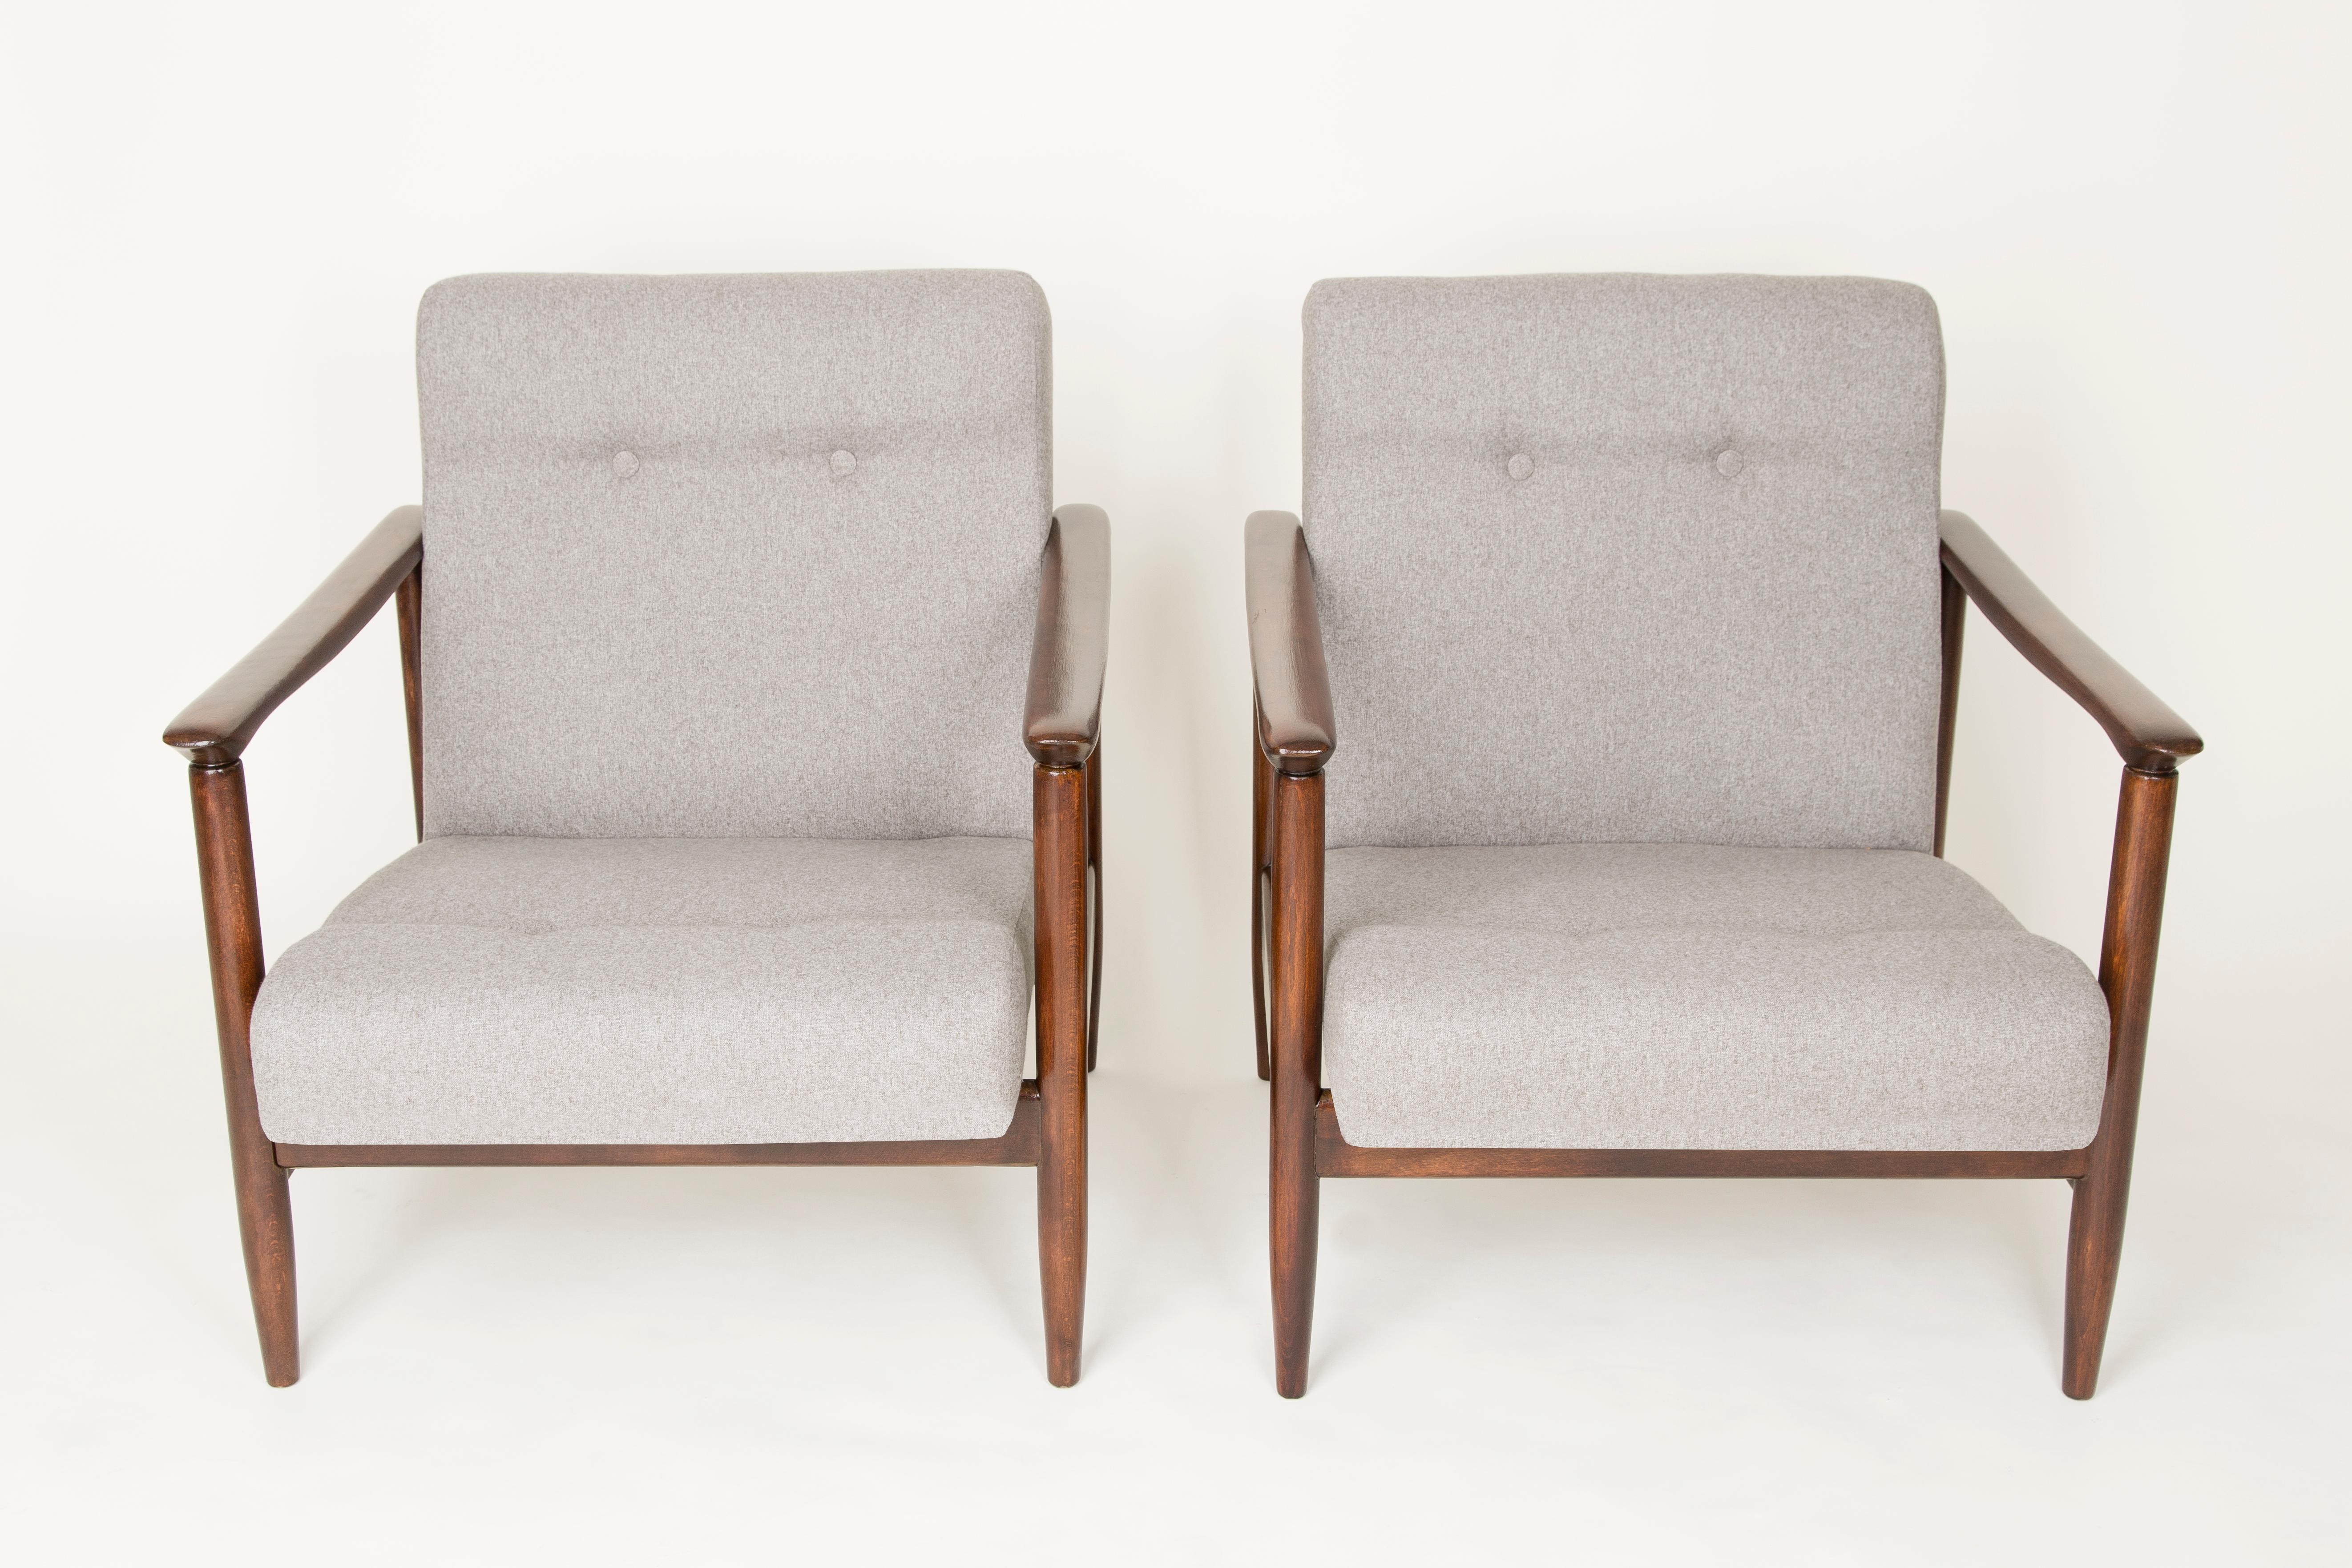 A pair of armchairs GFM-142, designed by Edmund Homa. The armchairs were made in the 1960s in the Gosciecinska Furniture Factory. They are made from solid beechwood. The GFM-142 armchair is regarded one of the best polish armchair design from the